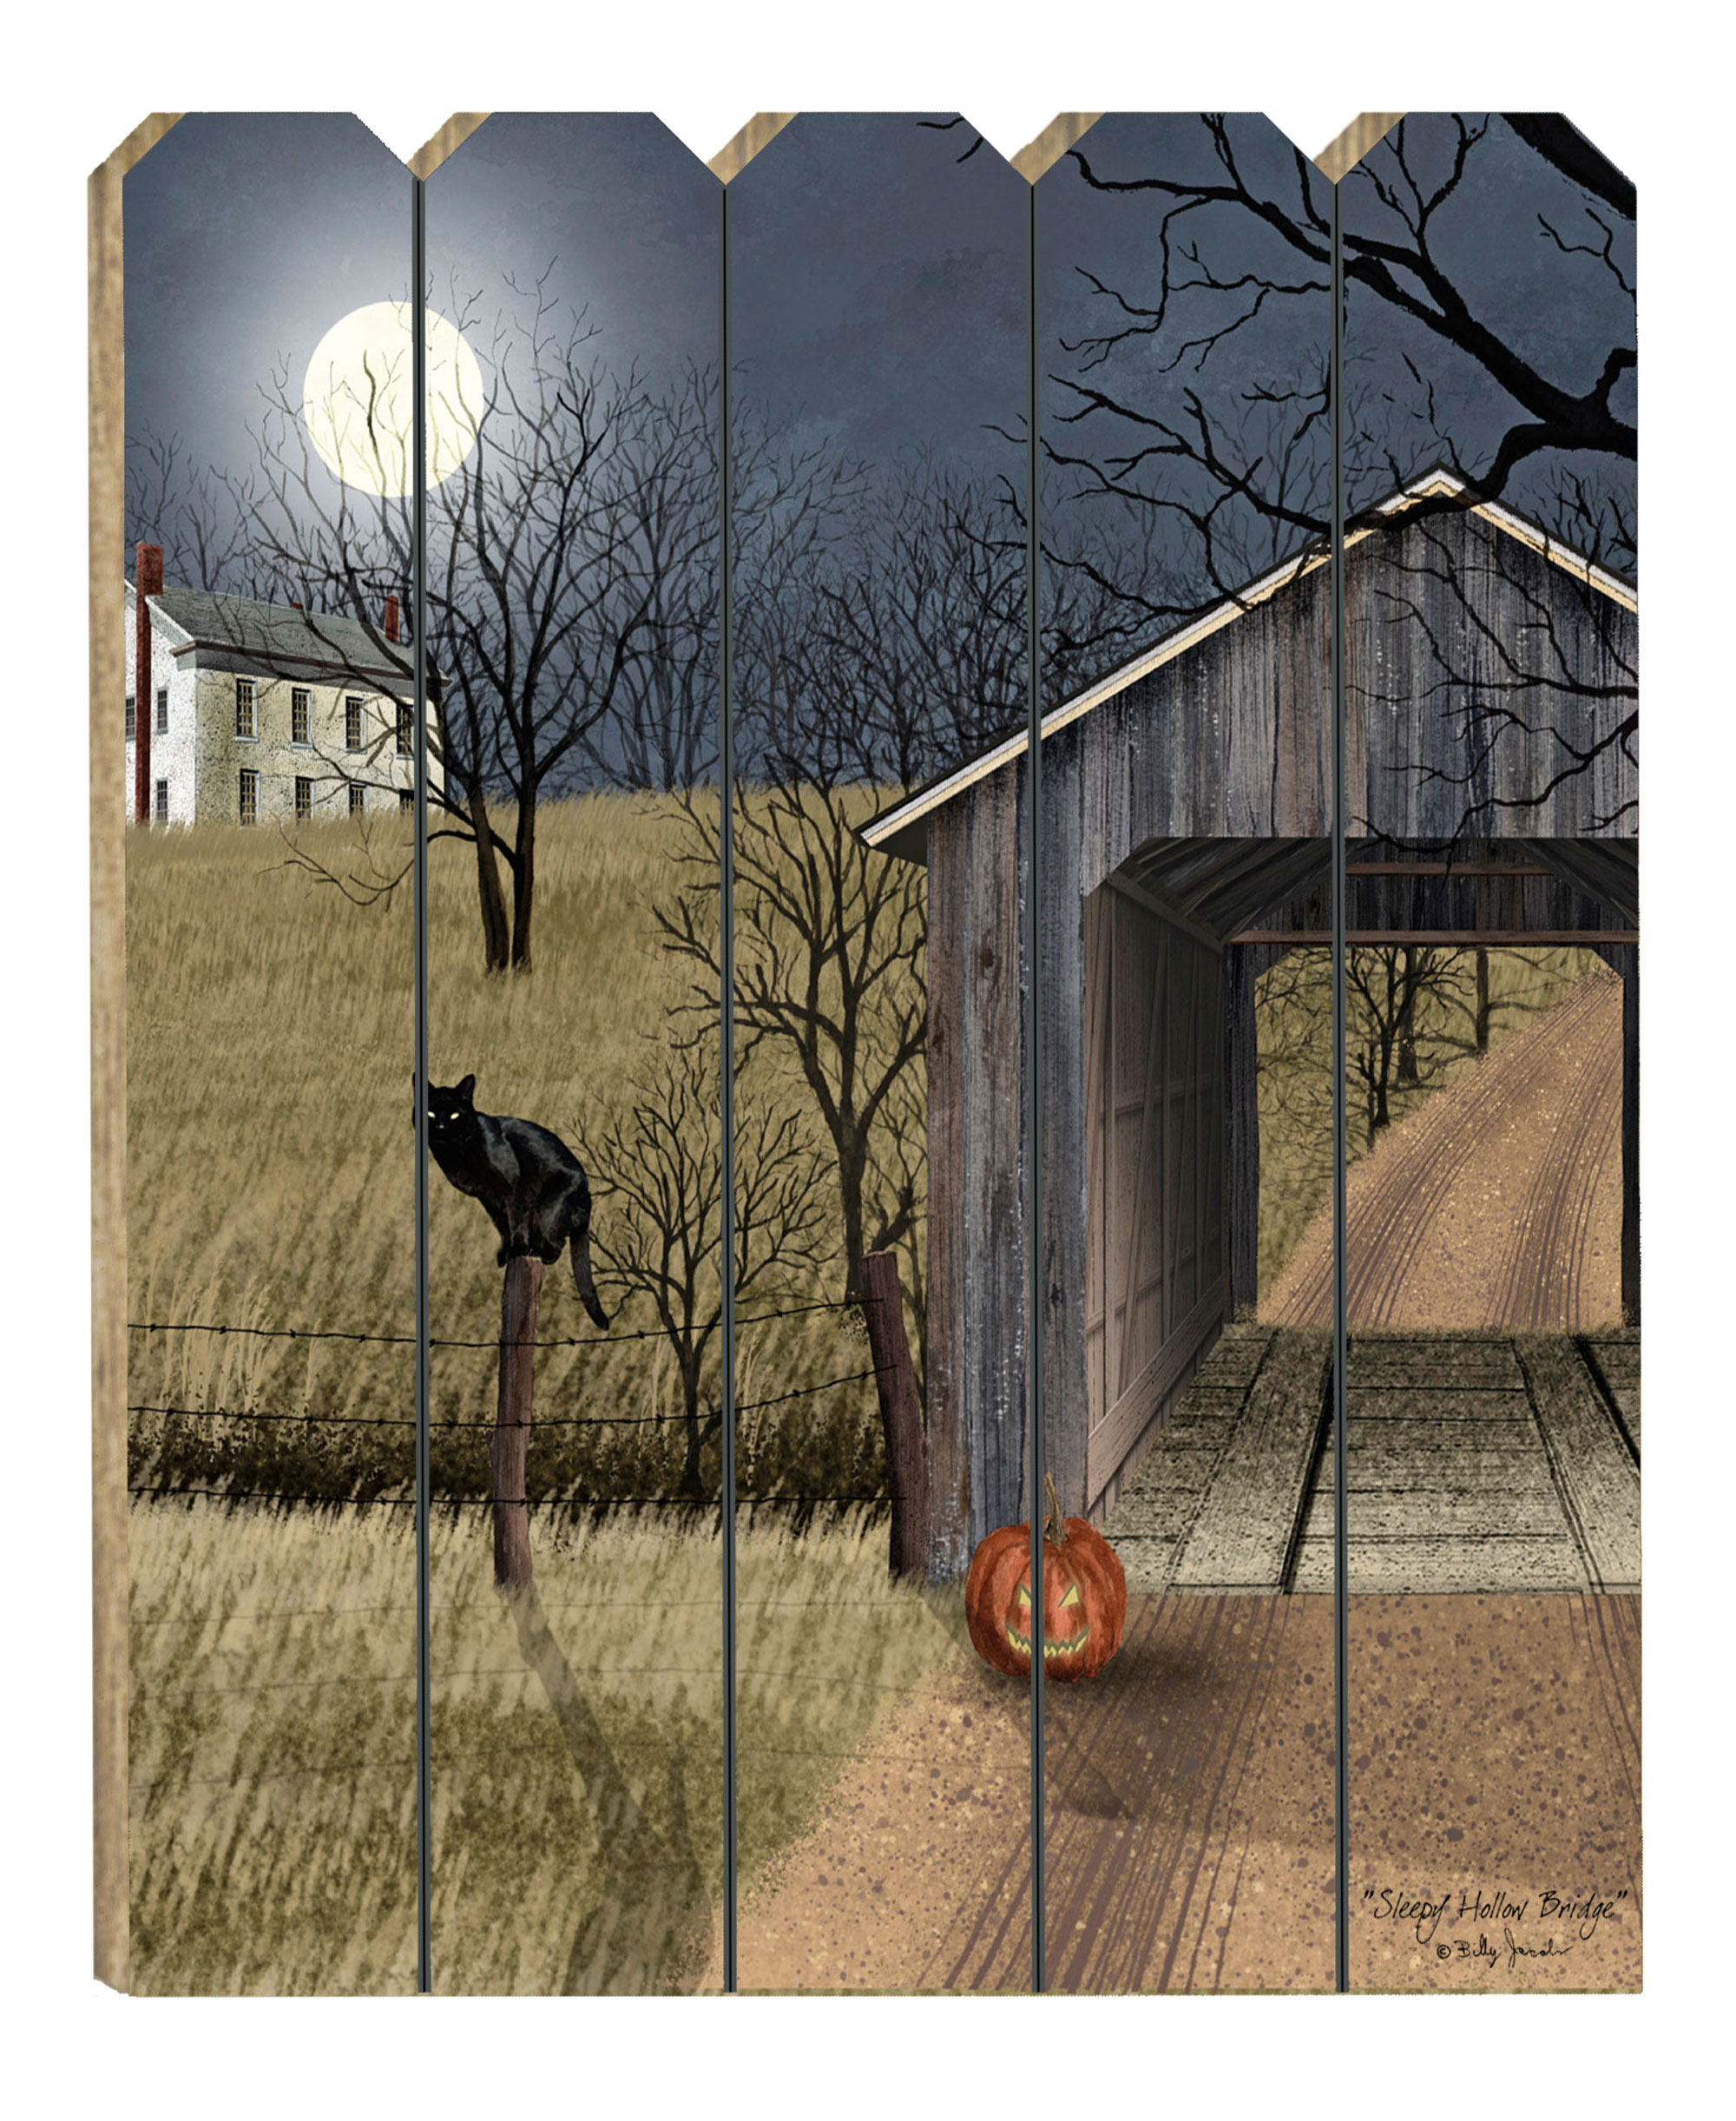 "Sleepy Hollow Bridge" By Artisan Billy Jacobs, Printed on Wooden Picket Fence Wall Art